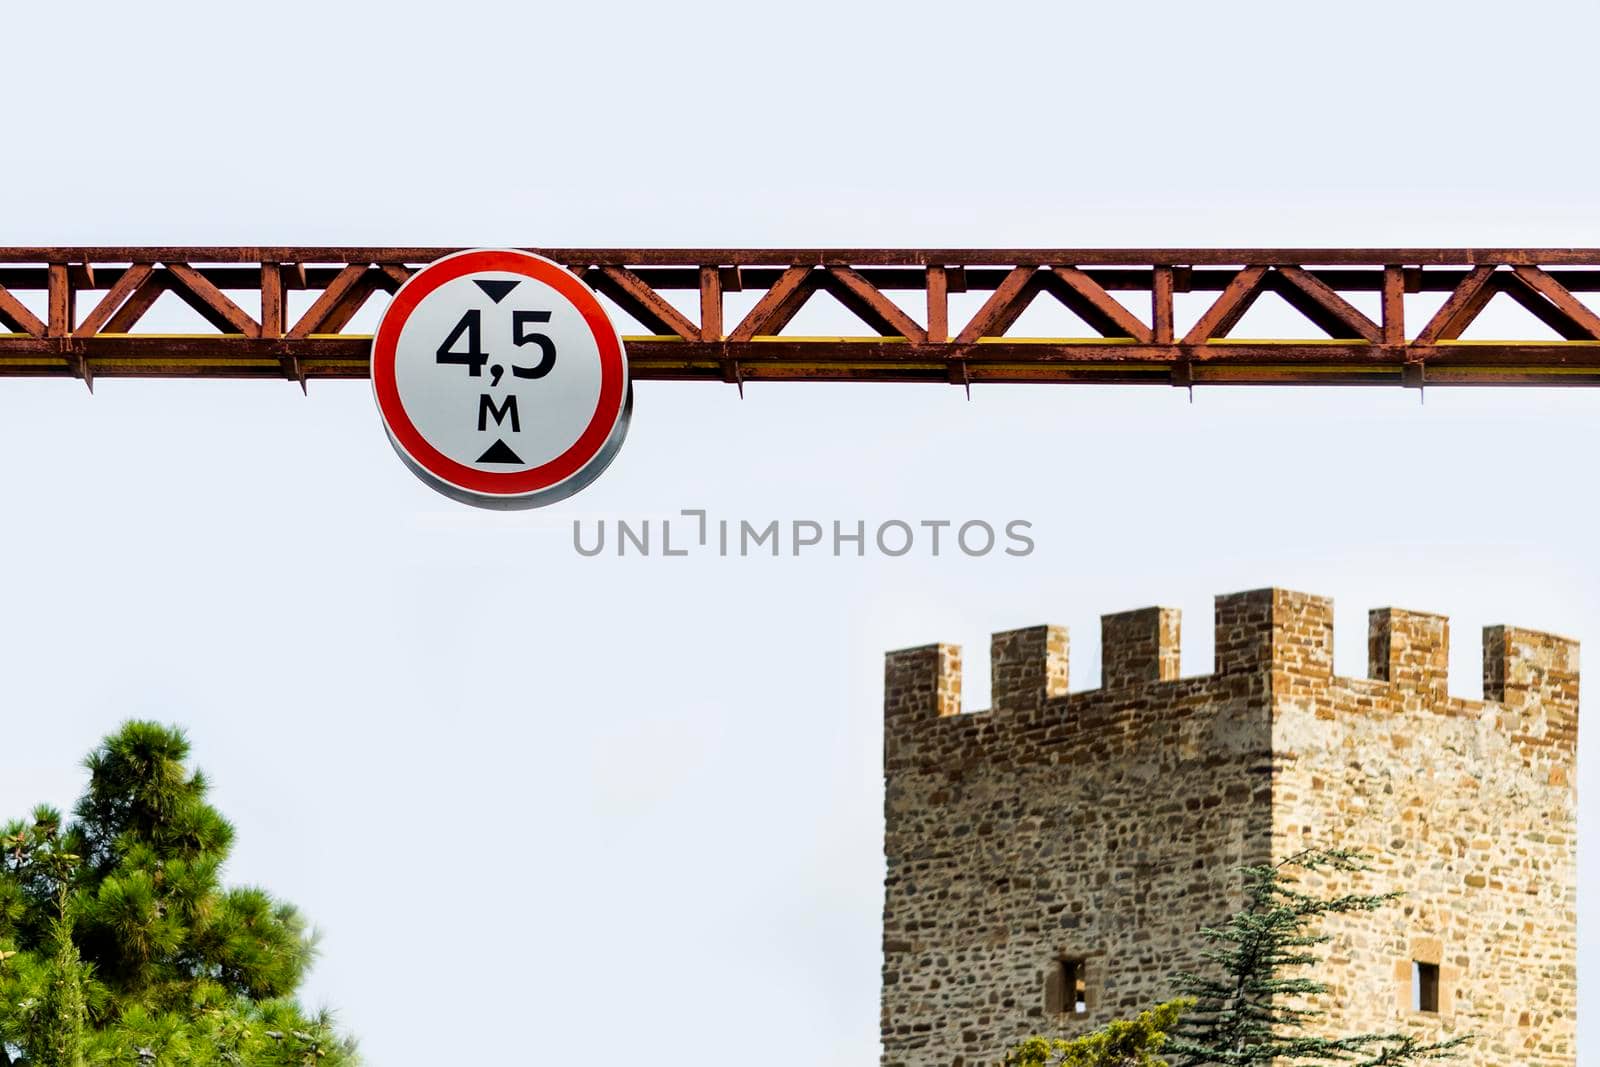 Road sign is limited to maximum height of 4.5 meters by Essffes